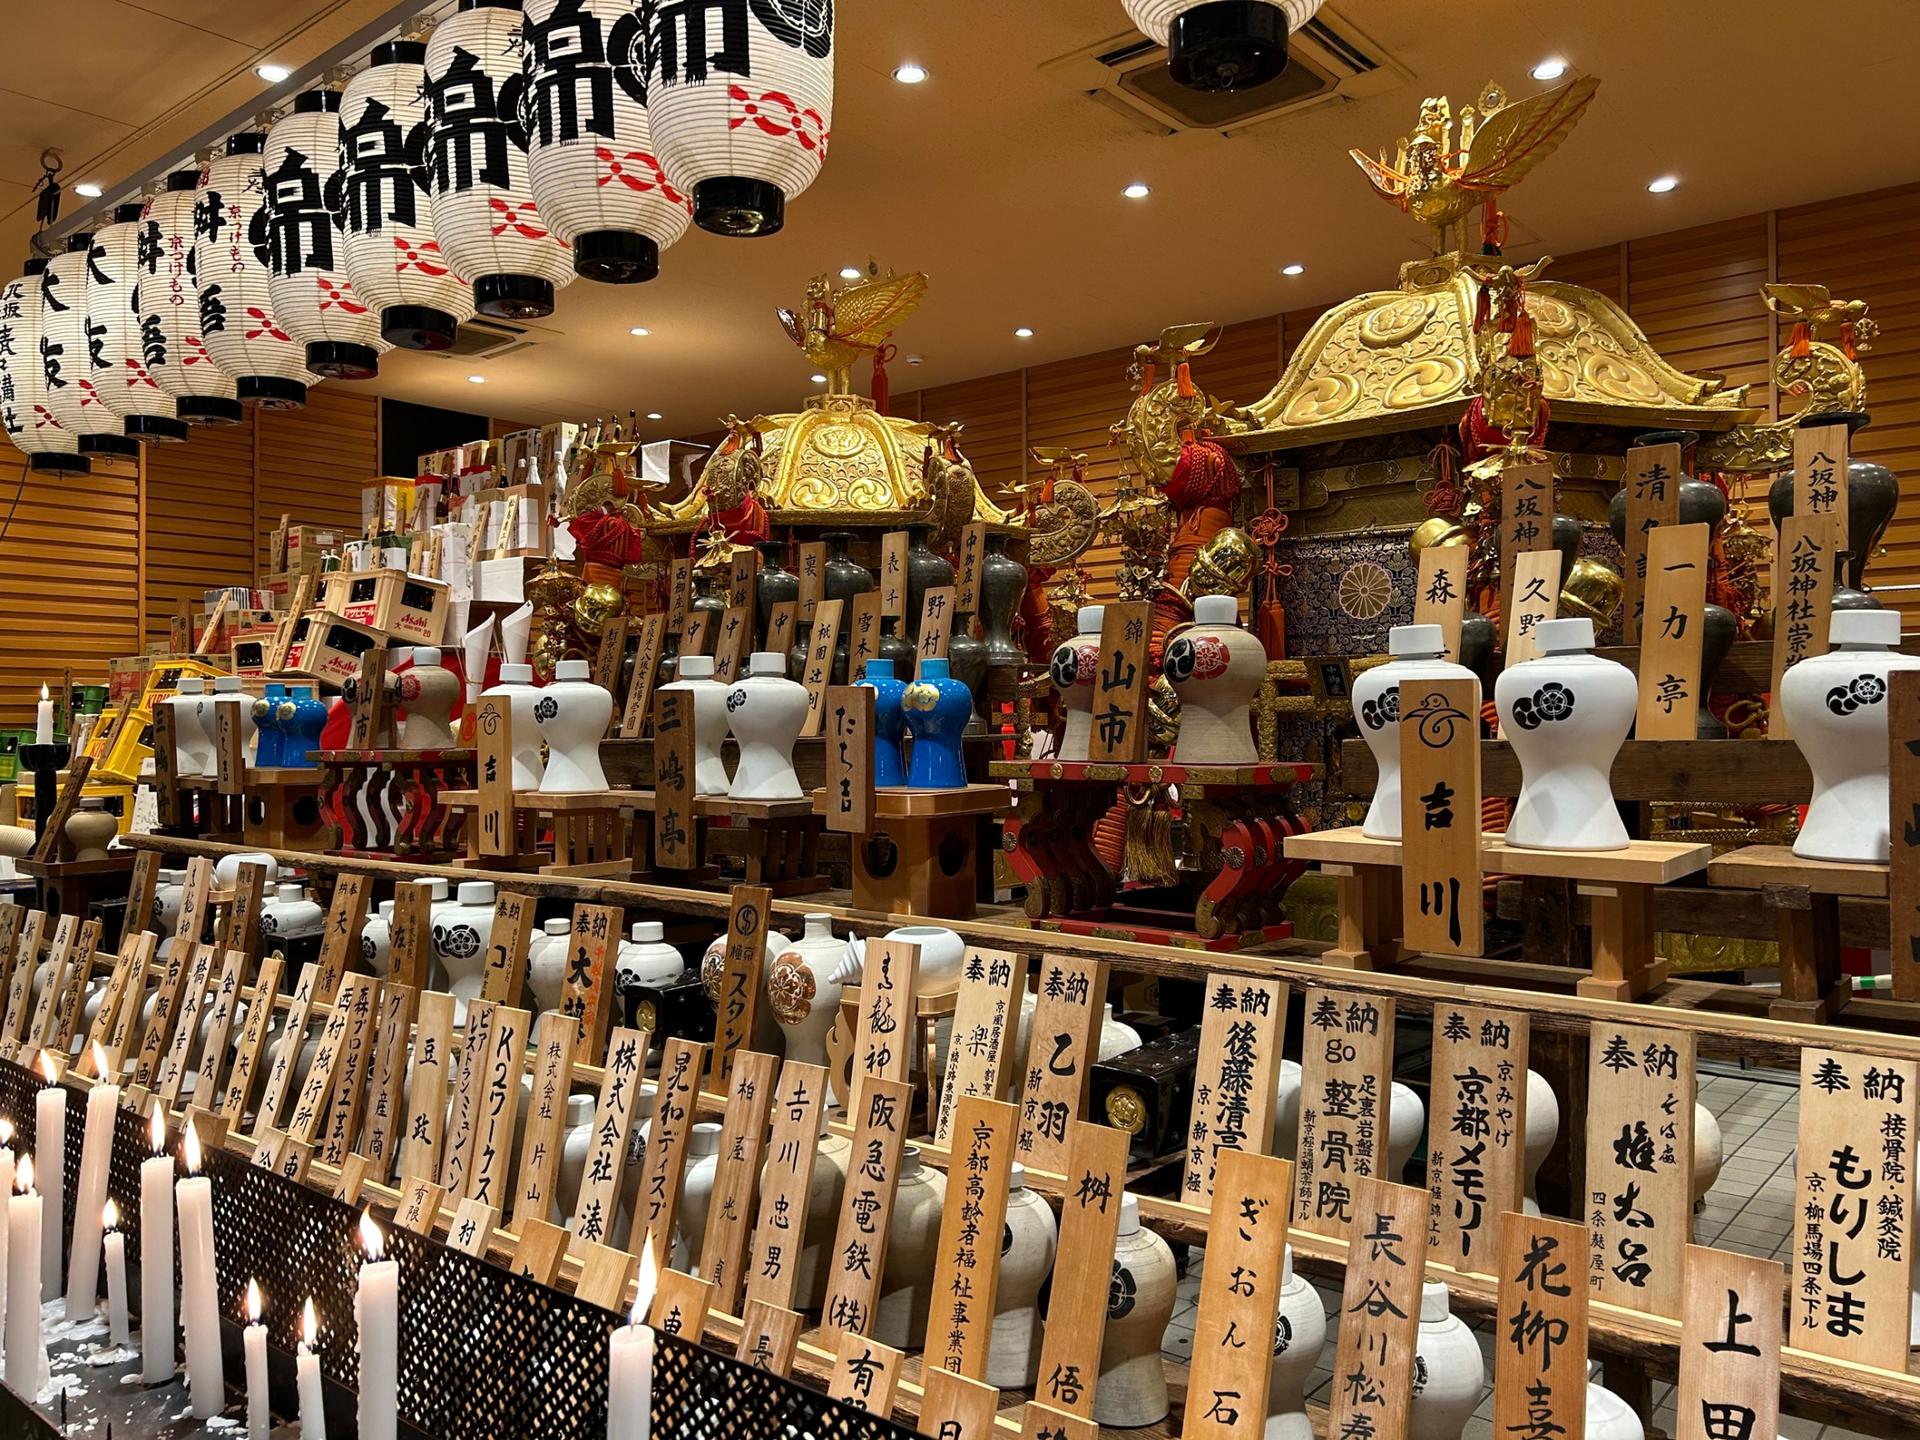 Golden palanquins called Mikoshi, where deties are housed, were placed in  downtown Kyoto for people to offer donations and prayers, before it was taken back to the main shrine on July 24.